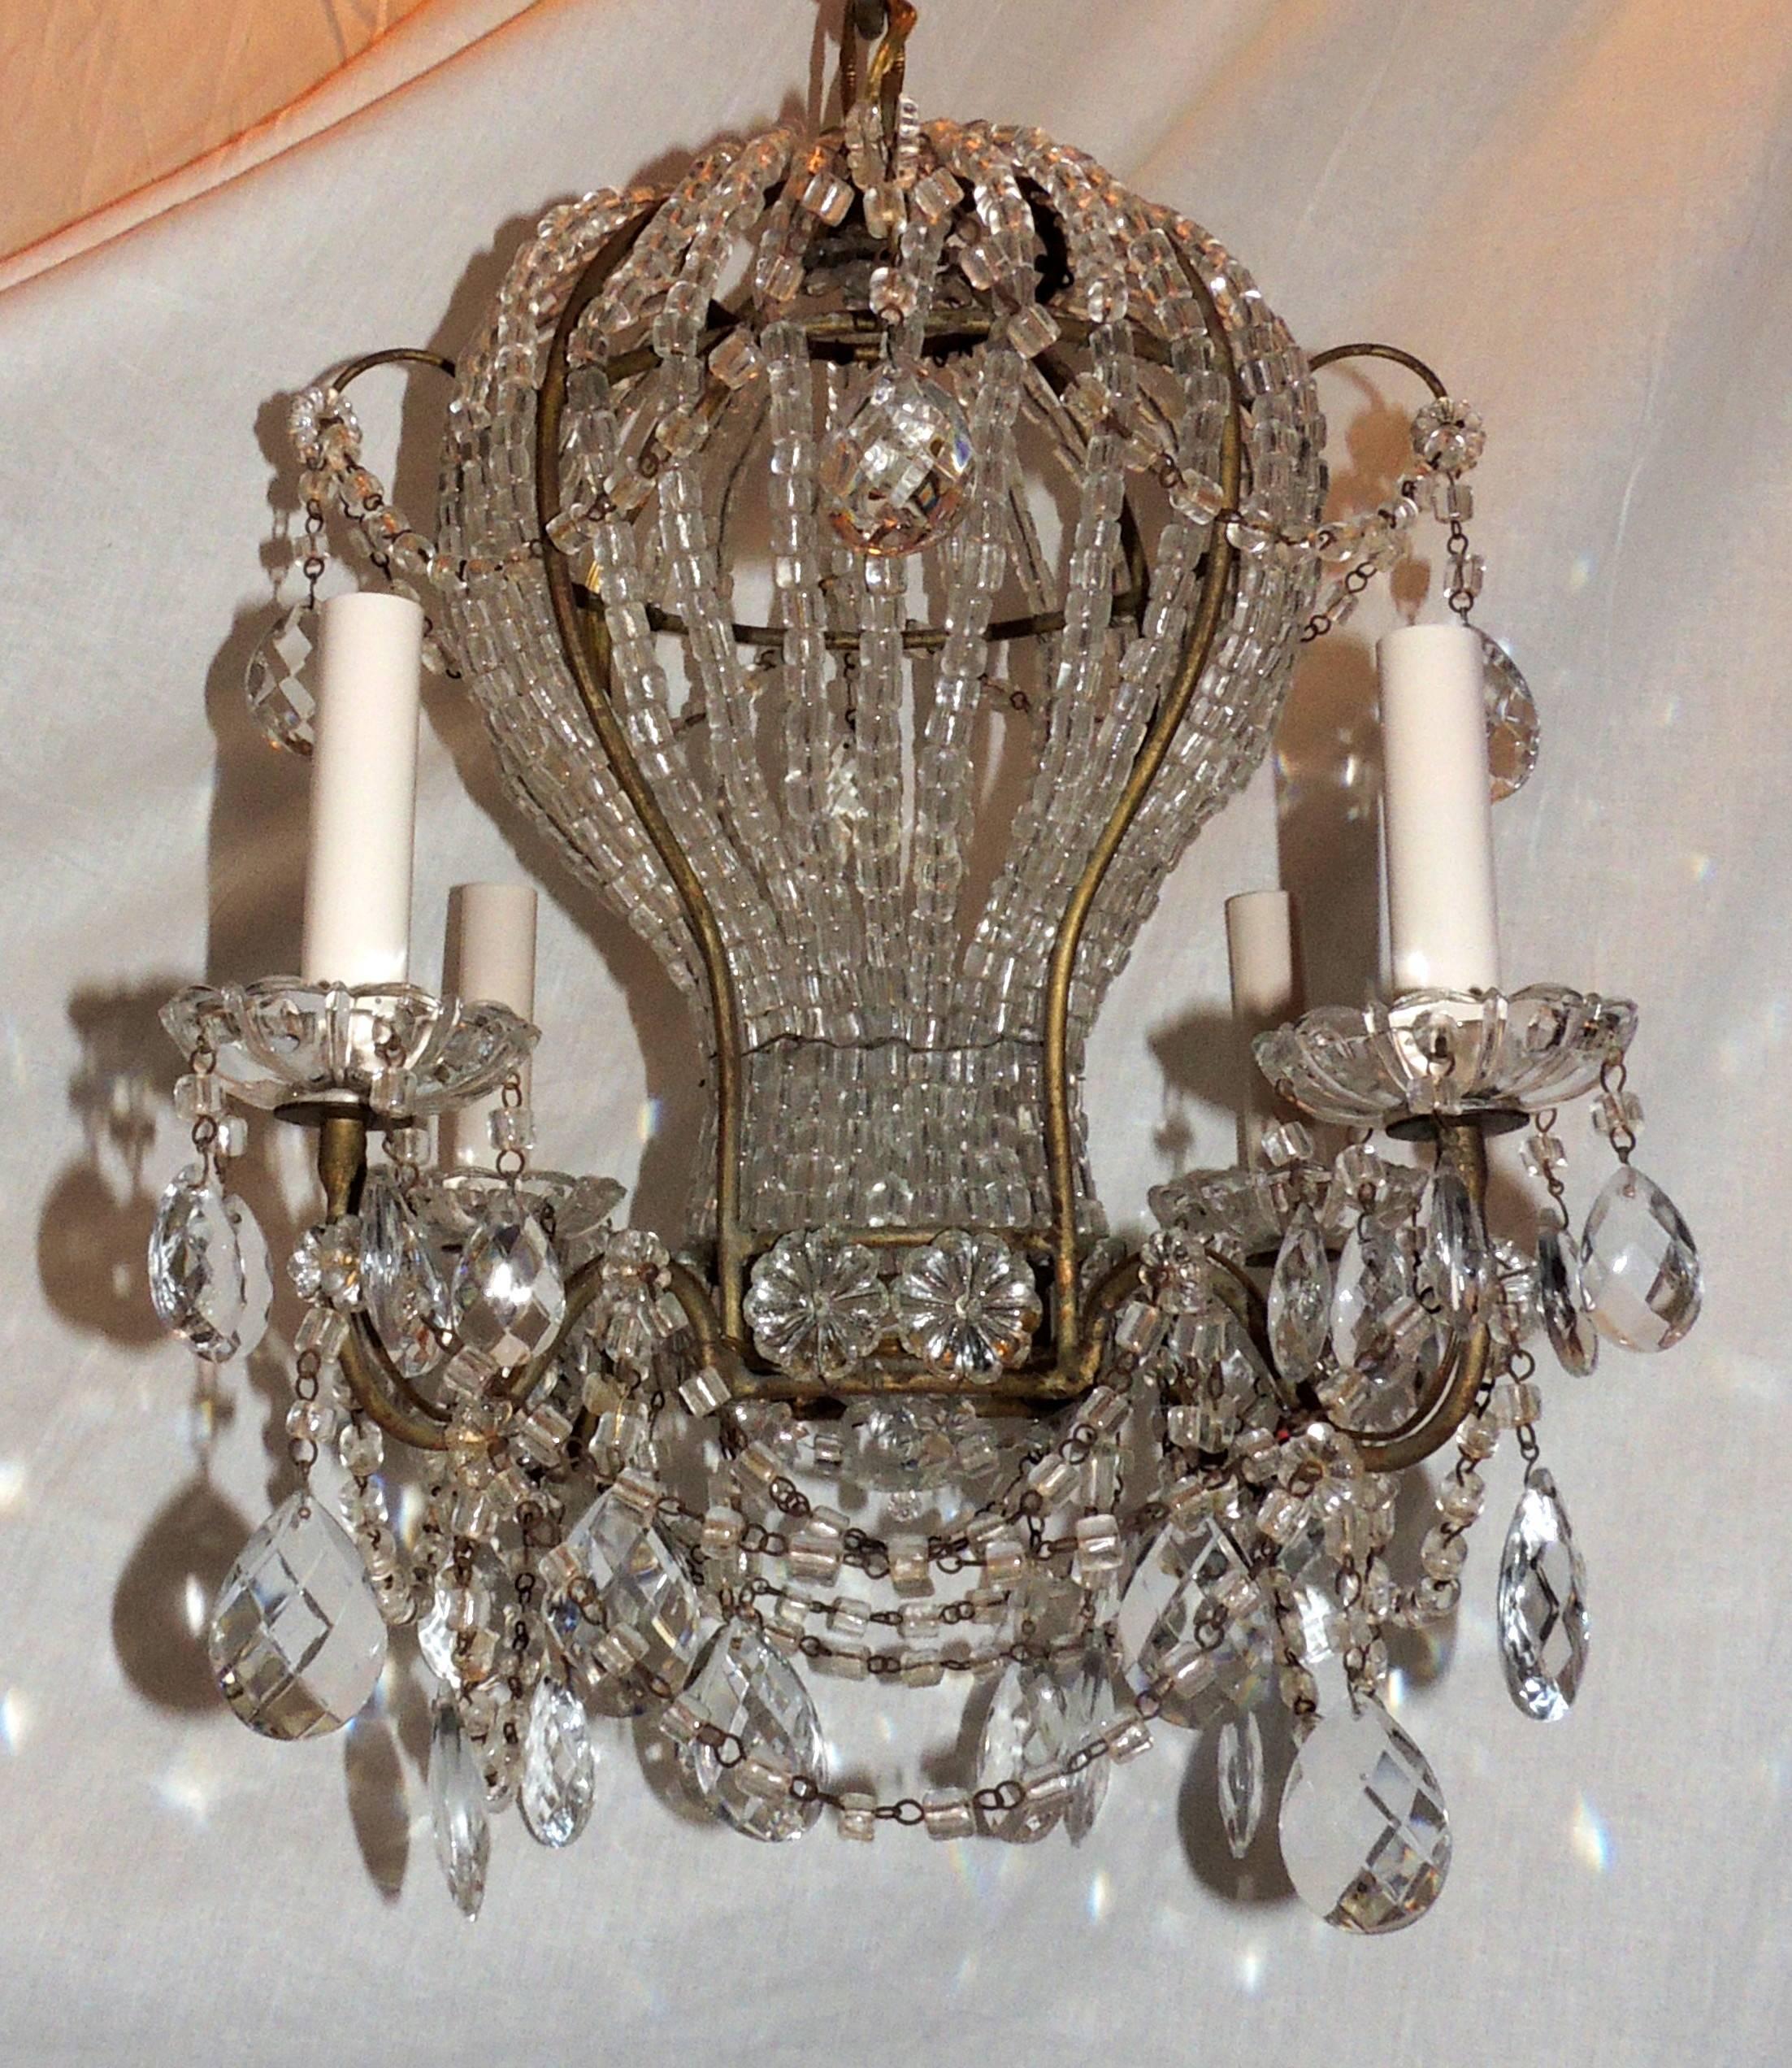 A wonderful vintage Italian gilt and macaroni beaded crystal hot air balloon chandelier, light fixture with beaded crystal swags and adorned with cut crystal drops throughout. Completely redone and comes ready to install.

Actual fixture